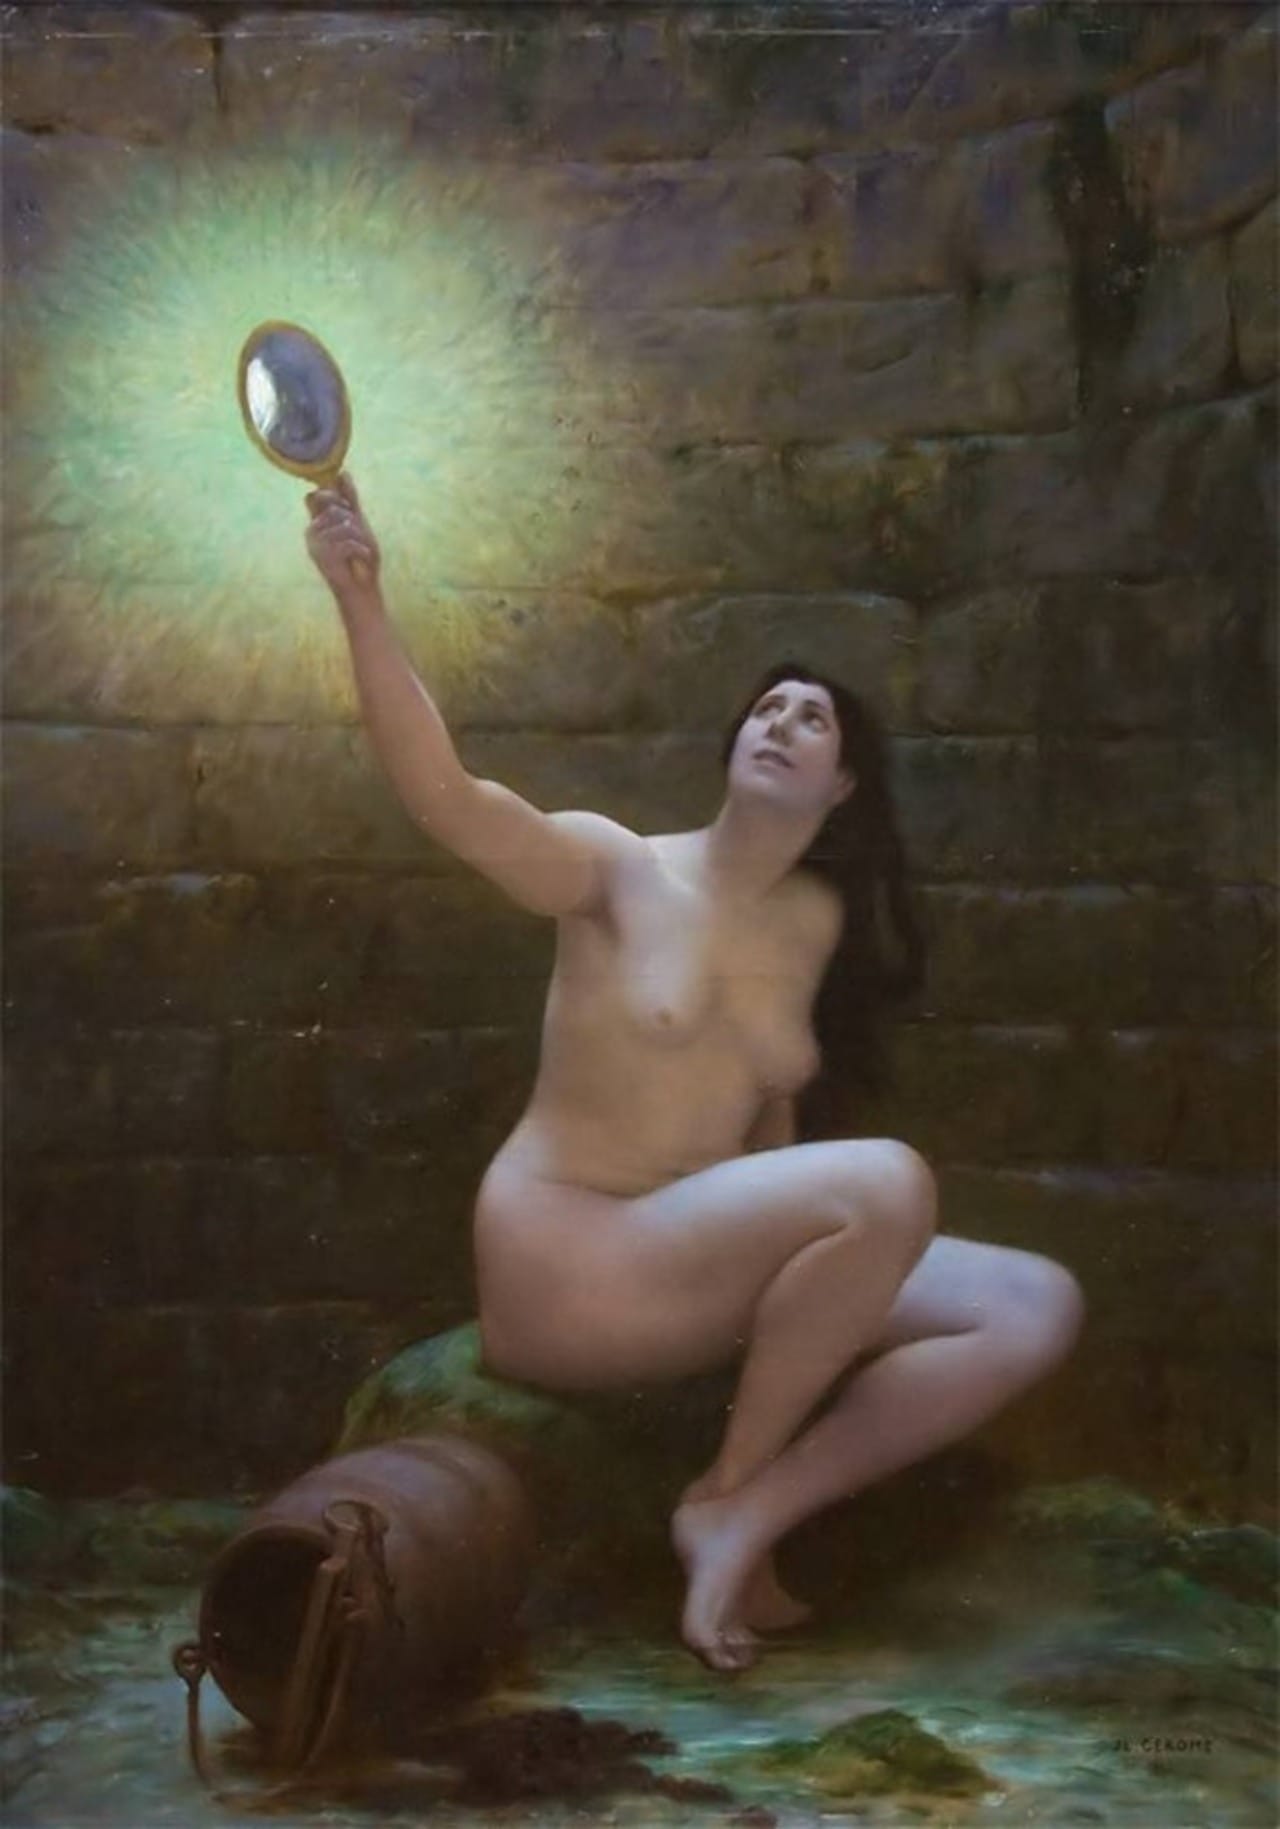 Truth is at the Bottom of the Well (1895), another work by Gérôme using the metaphors of Truth, her mirror, and the well.